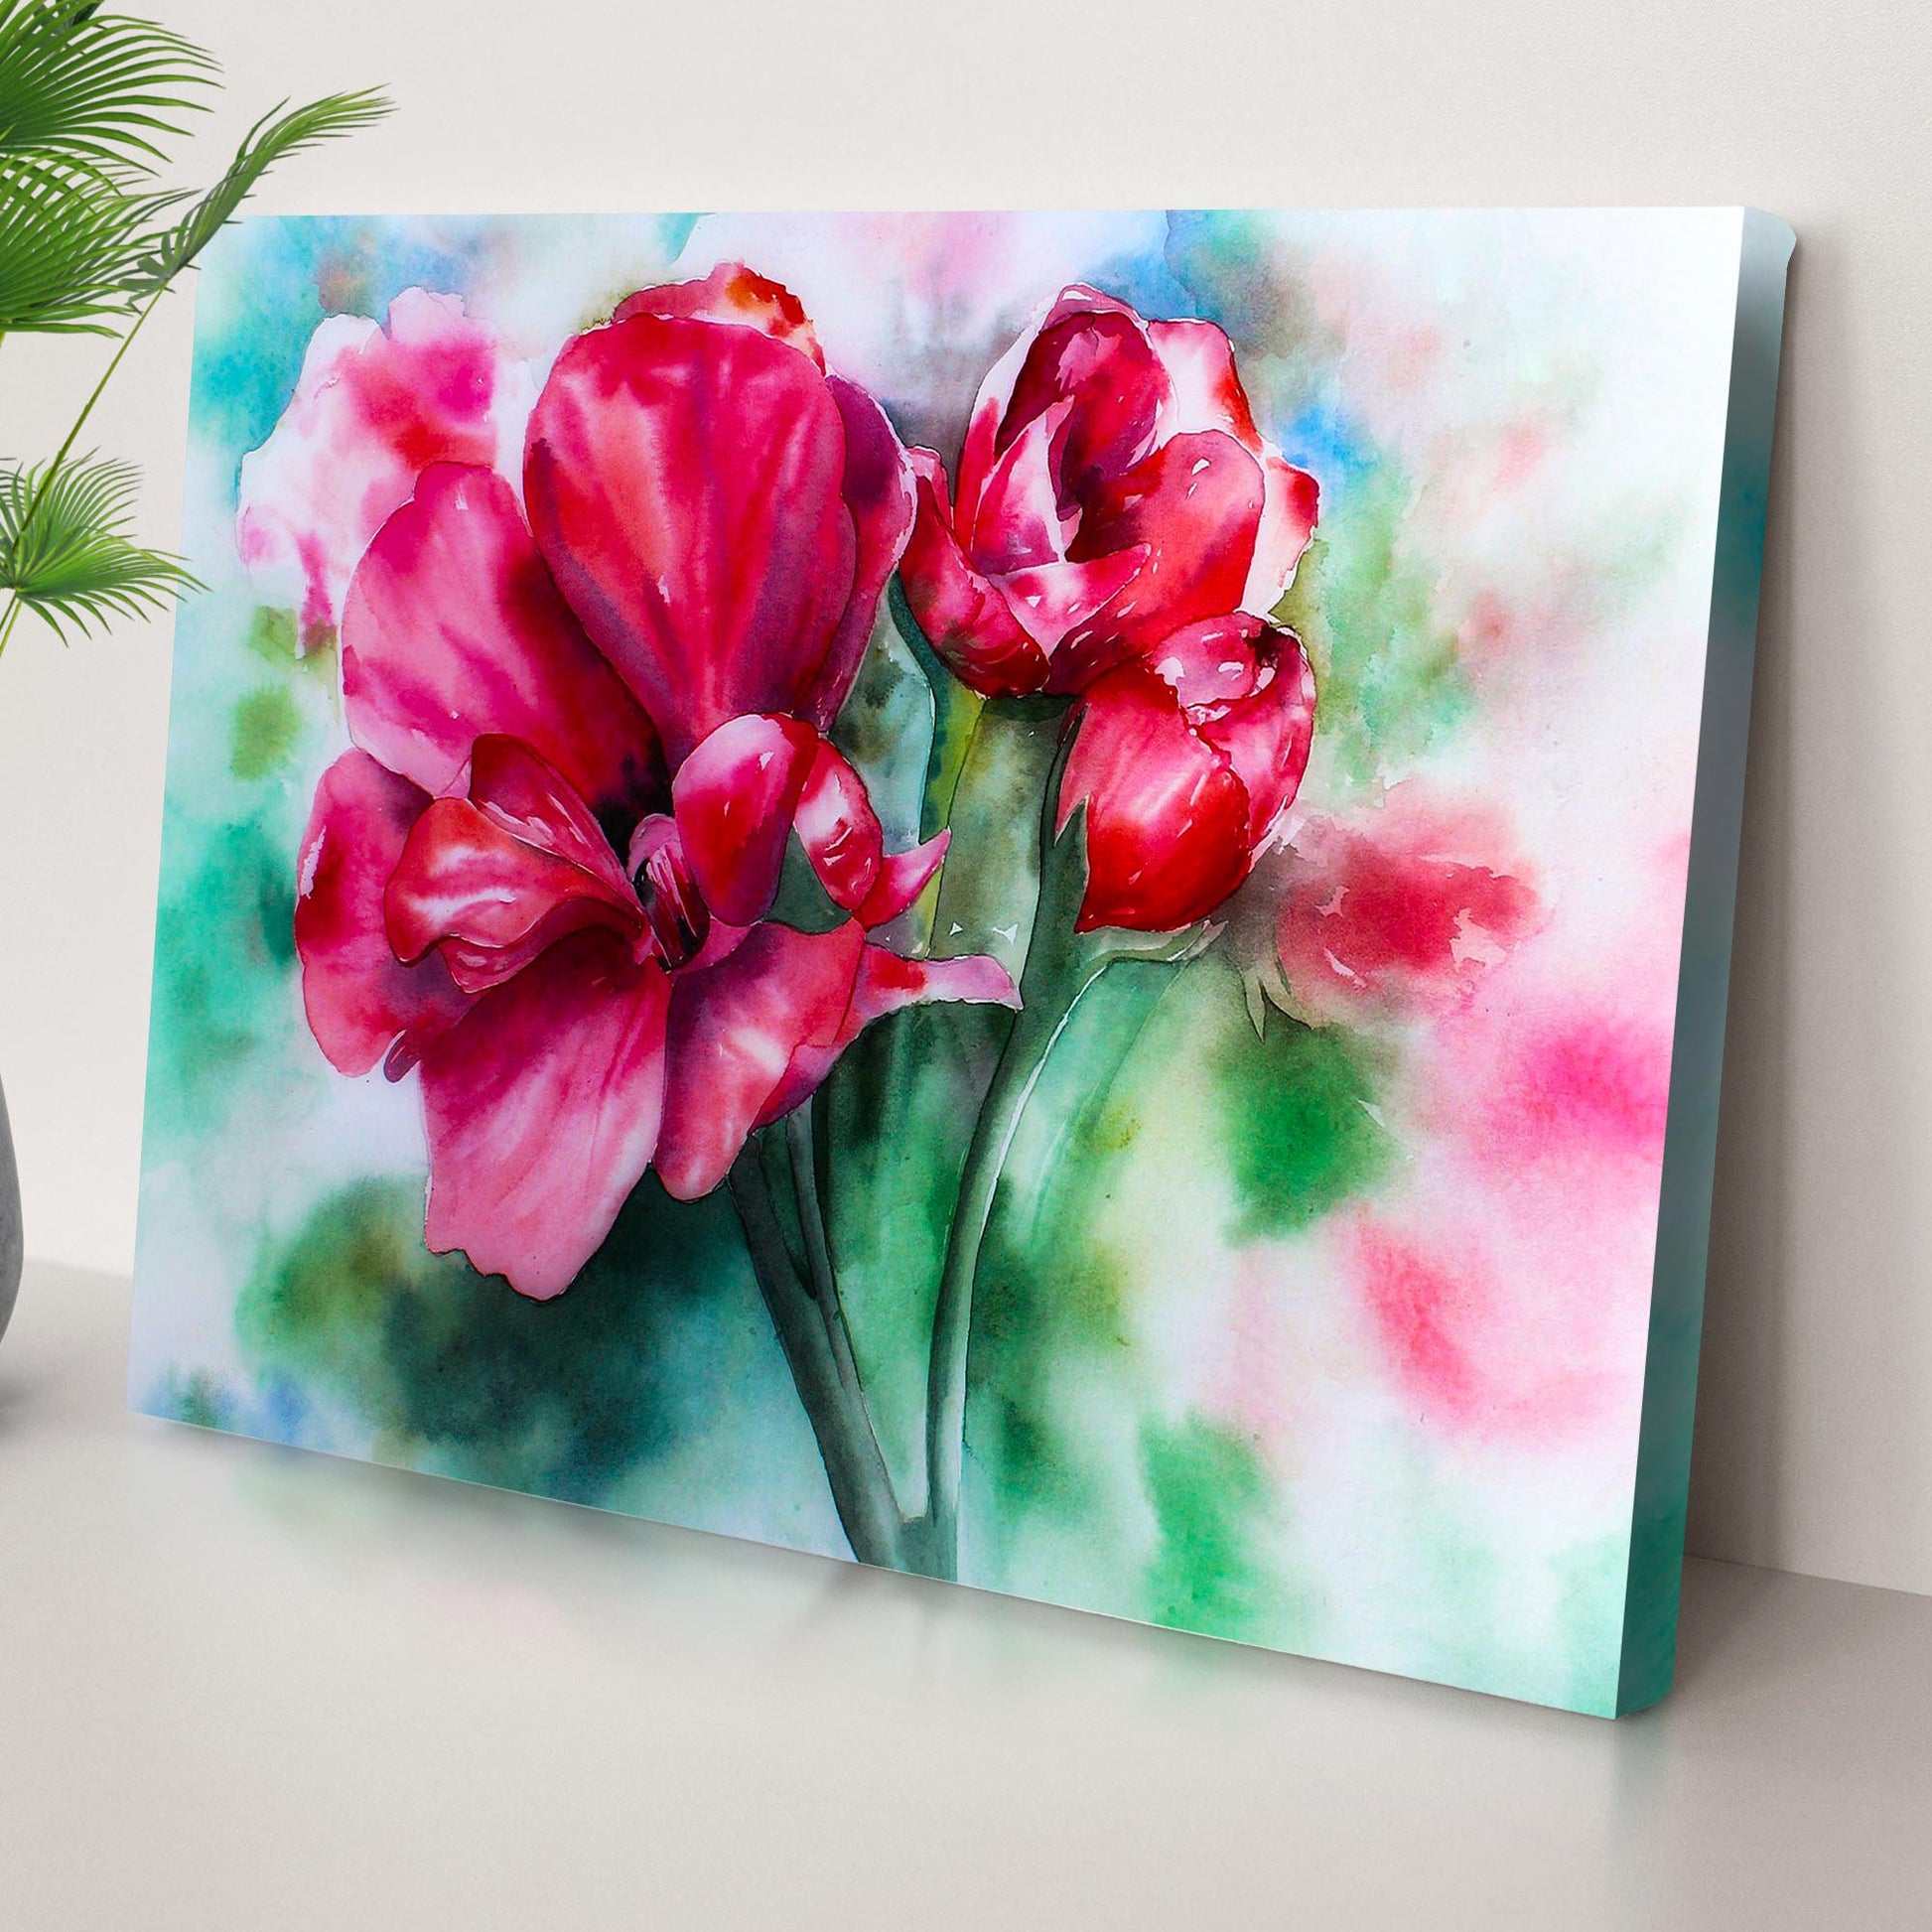 Flowers Geranium Pink Watercolor Canvas Wall Art Style 2 - Image by Tailored Canvases